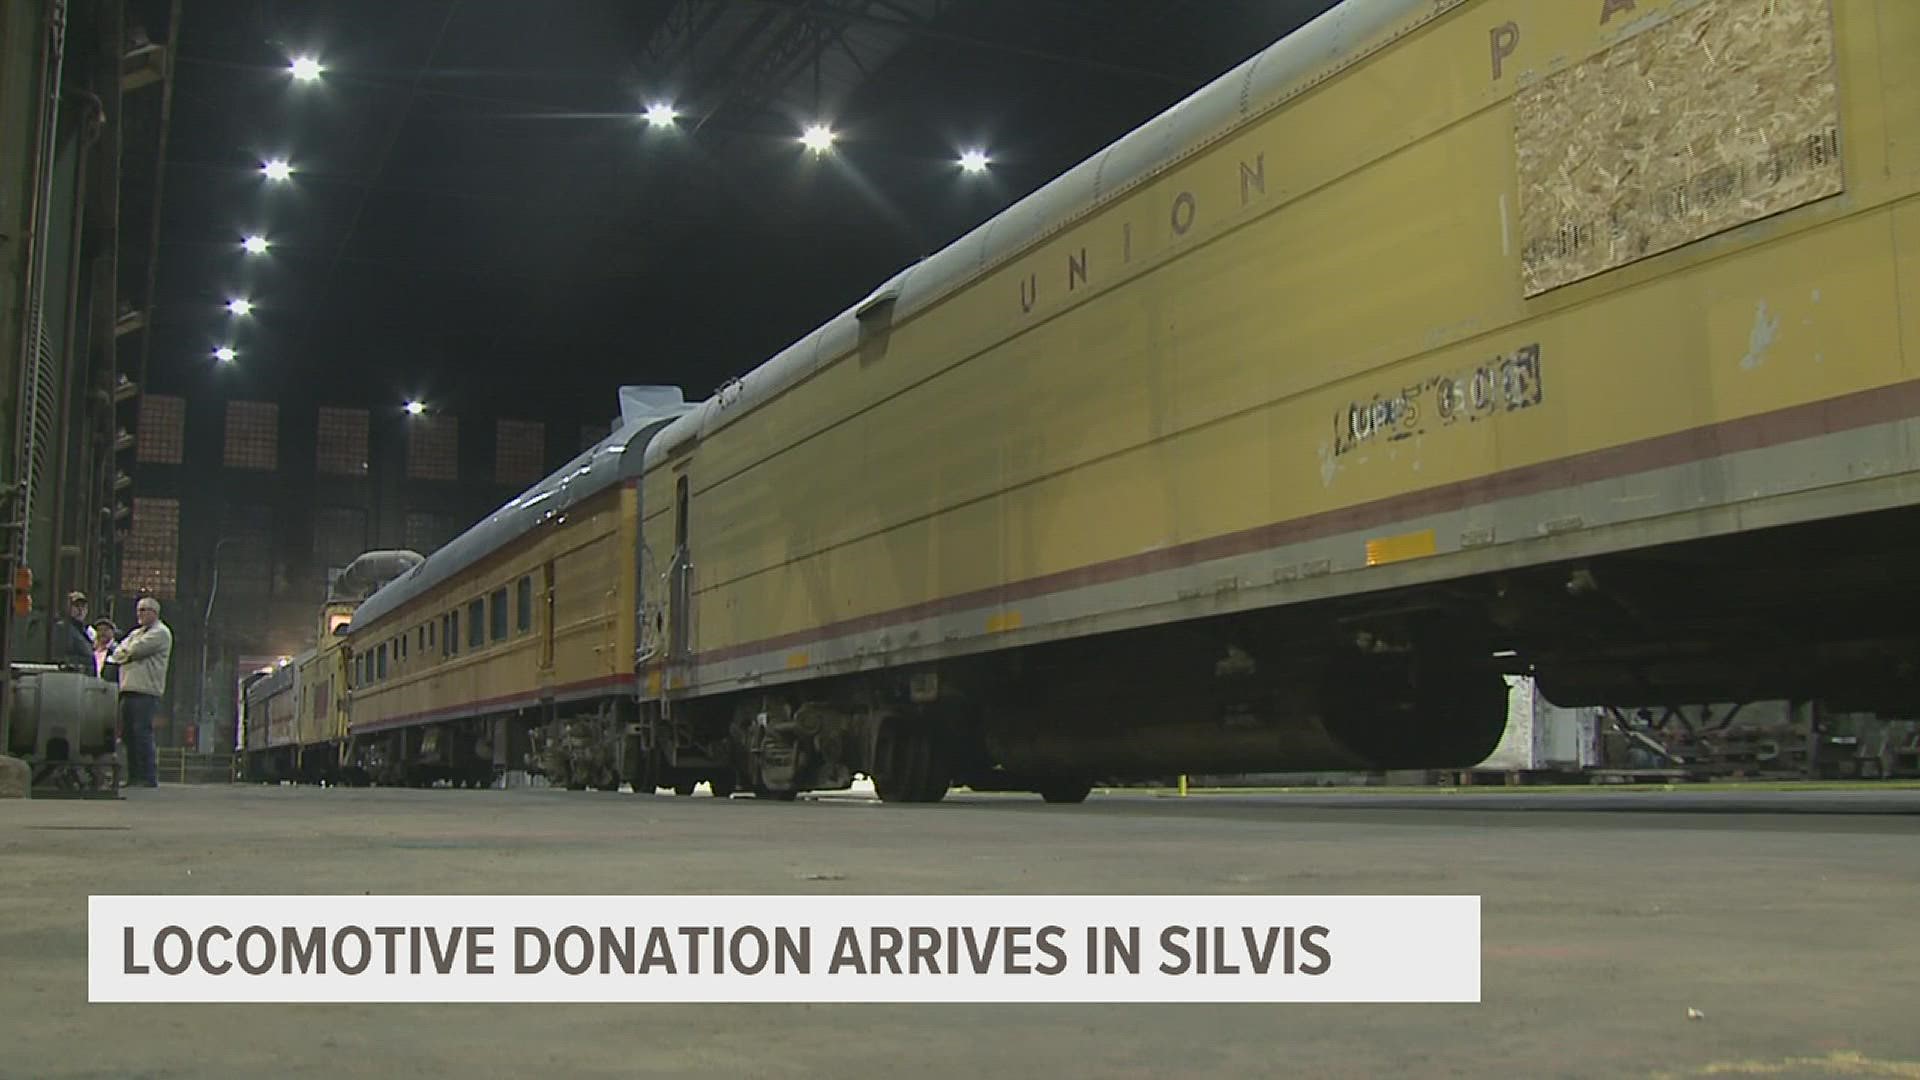 The trains traveled all the way to Silvis from Cheyenne, Wyoming.